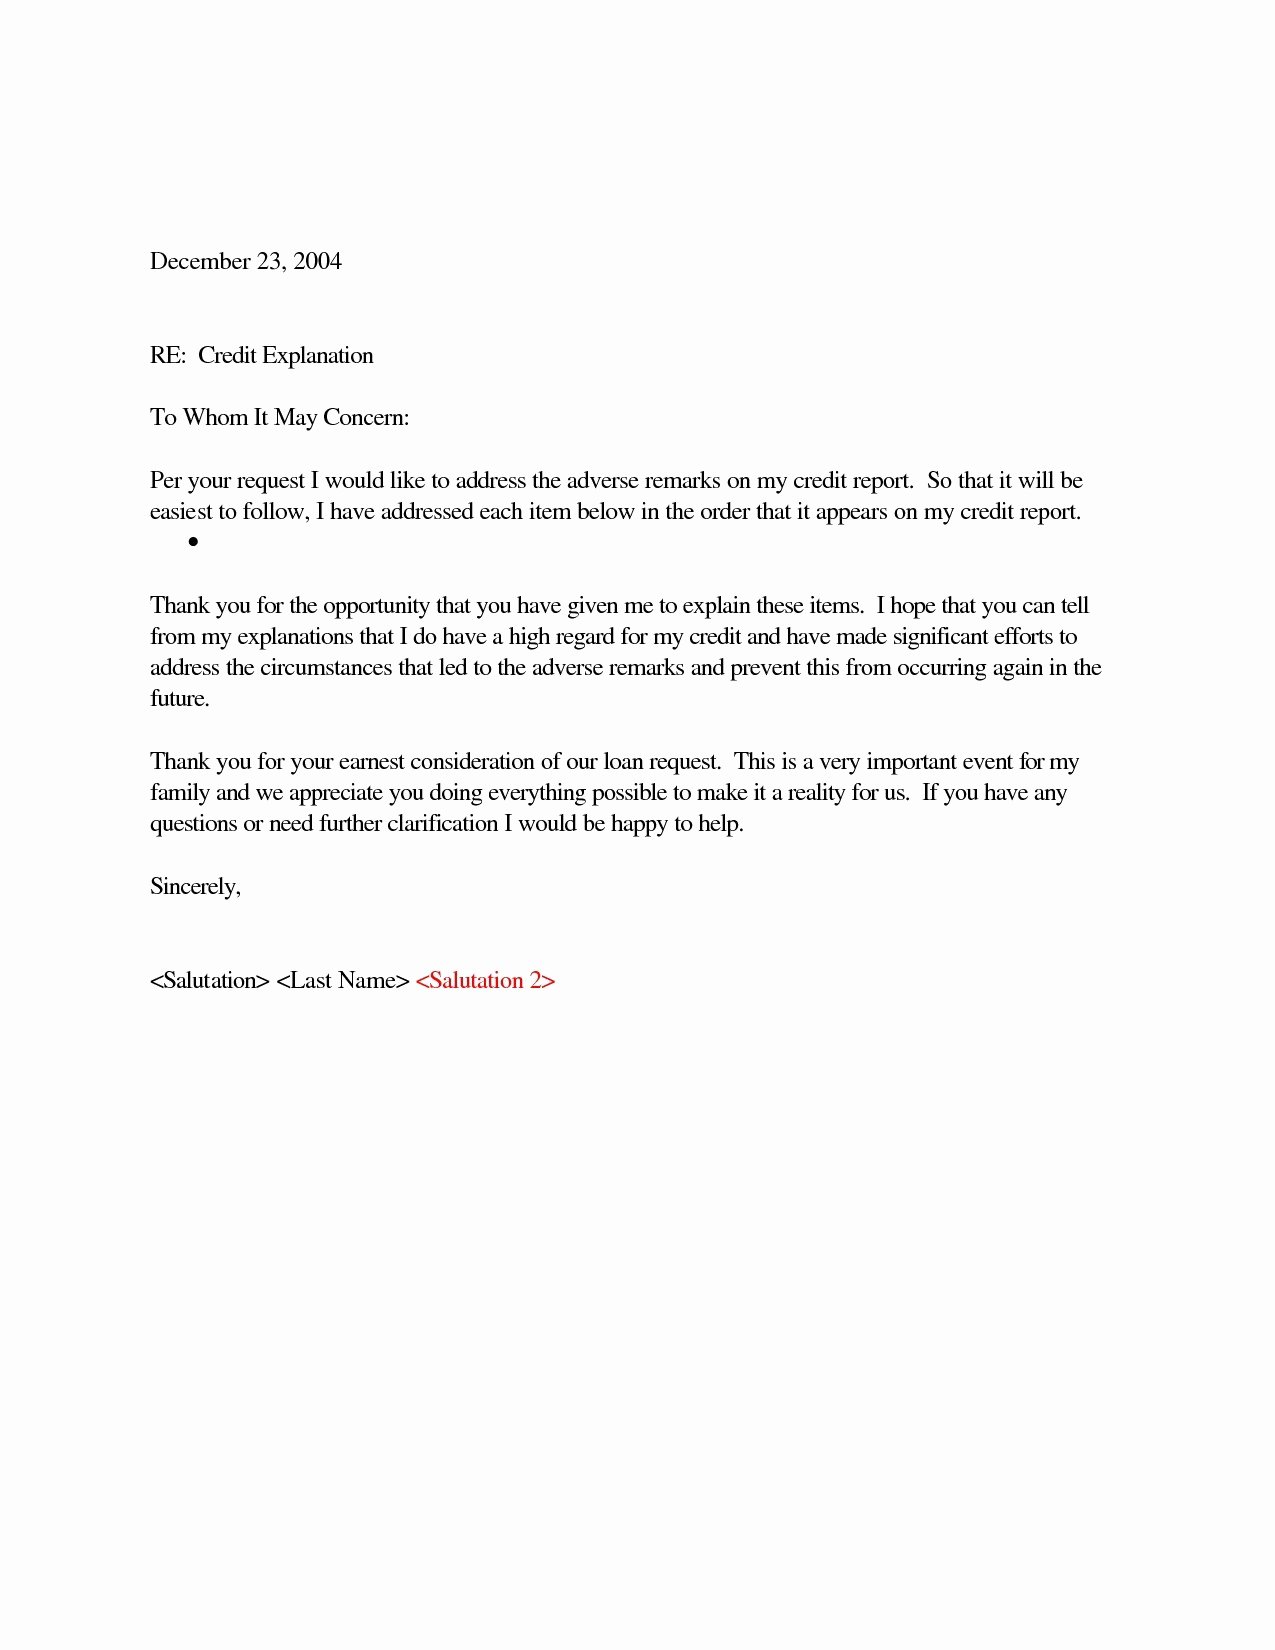 Cash Out Letter Of Explanation Best Of Letter Explanation Template Samples Valid Cash Out